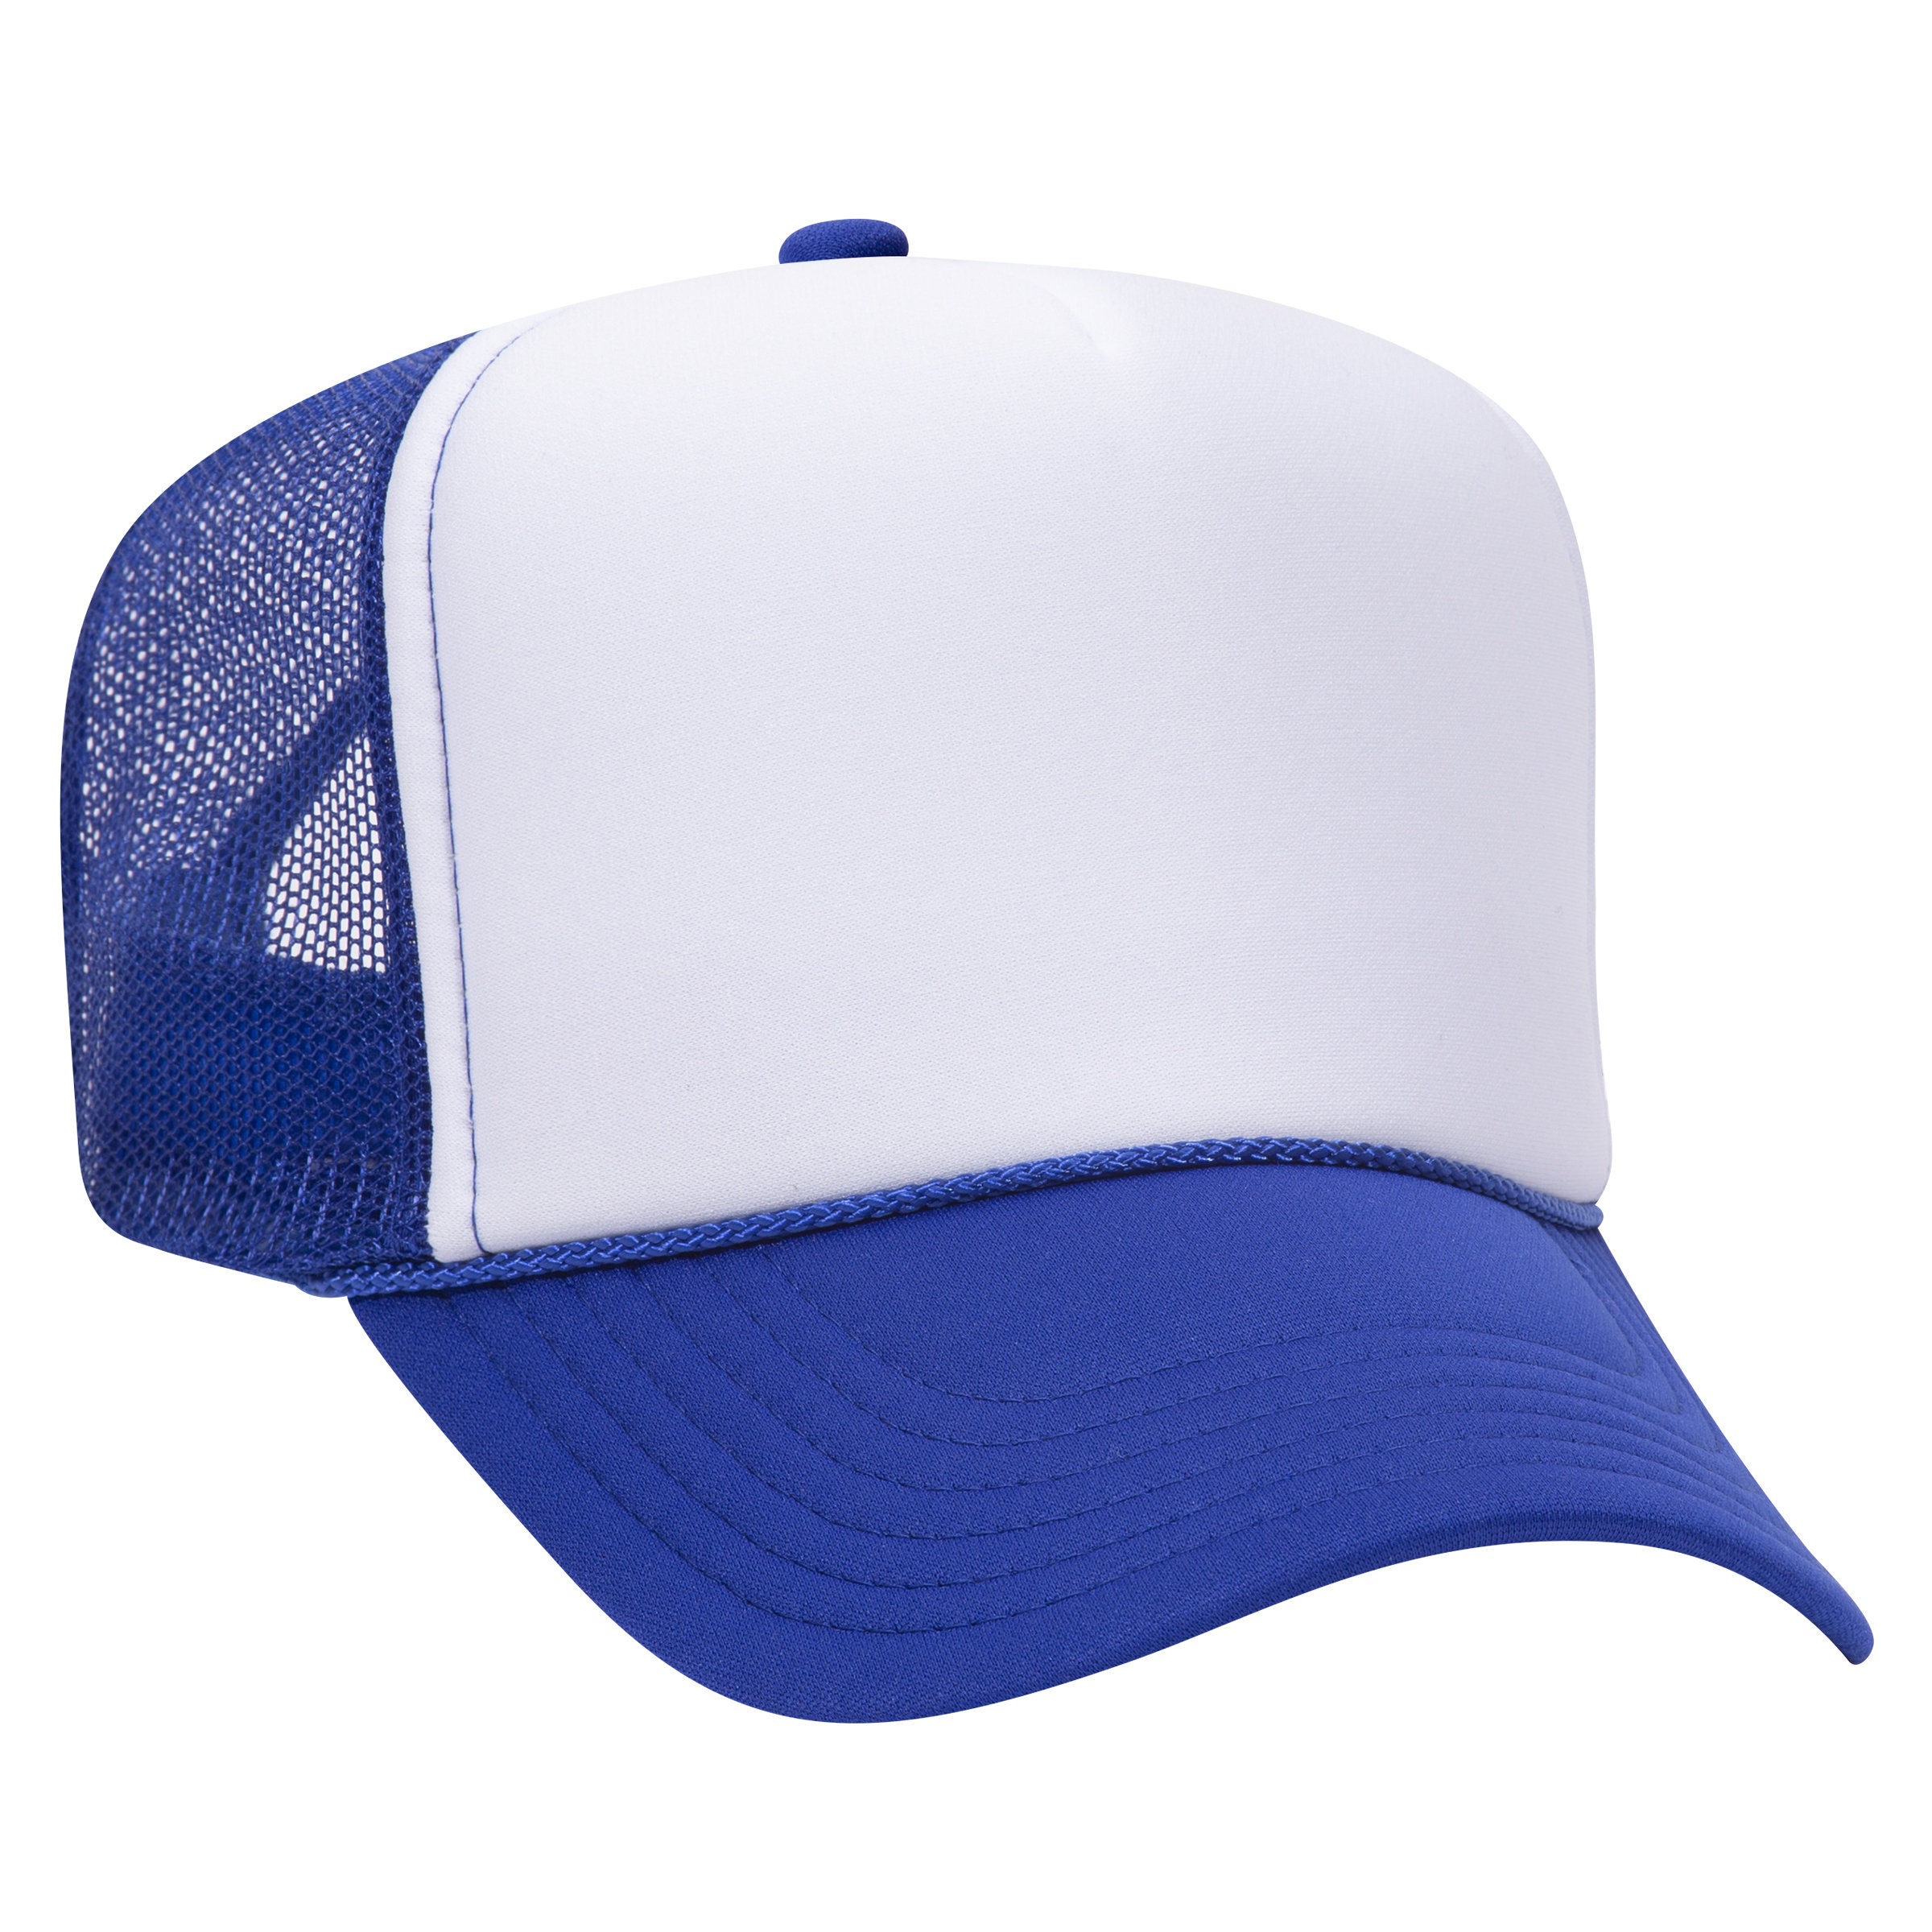 Shapers Image Meshpro Cap Insert for Trucker and Baseball Mesh Caps 3  Count, Large 